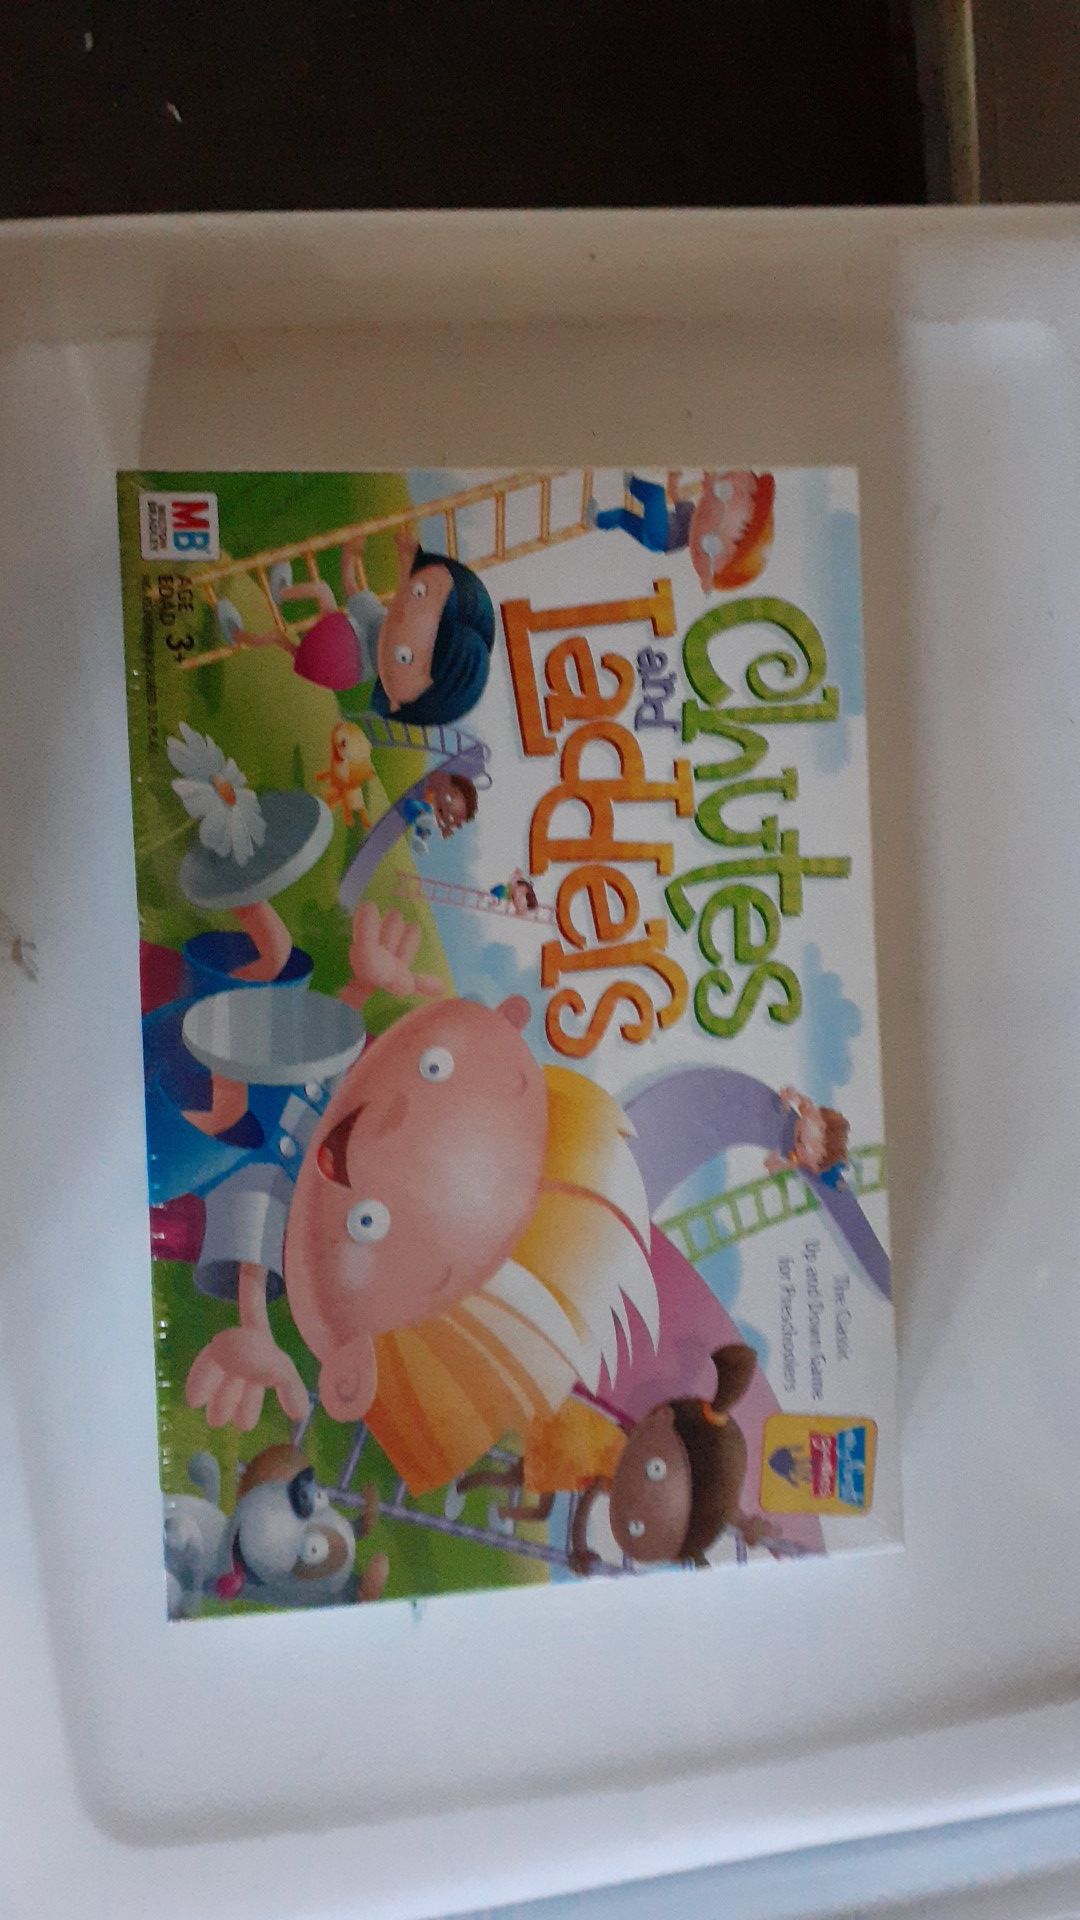 Chutes and latters board game for kids